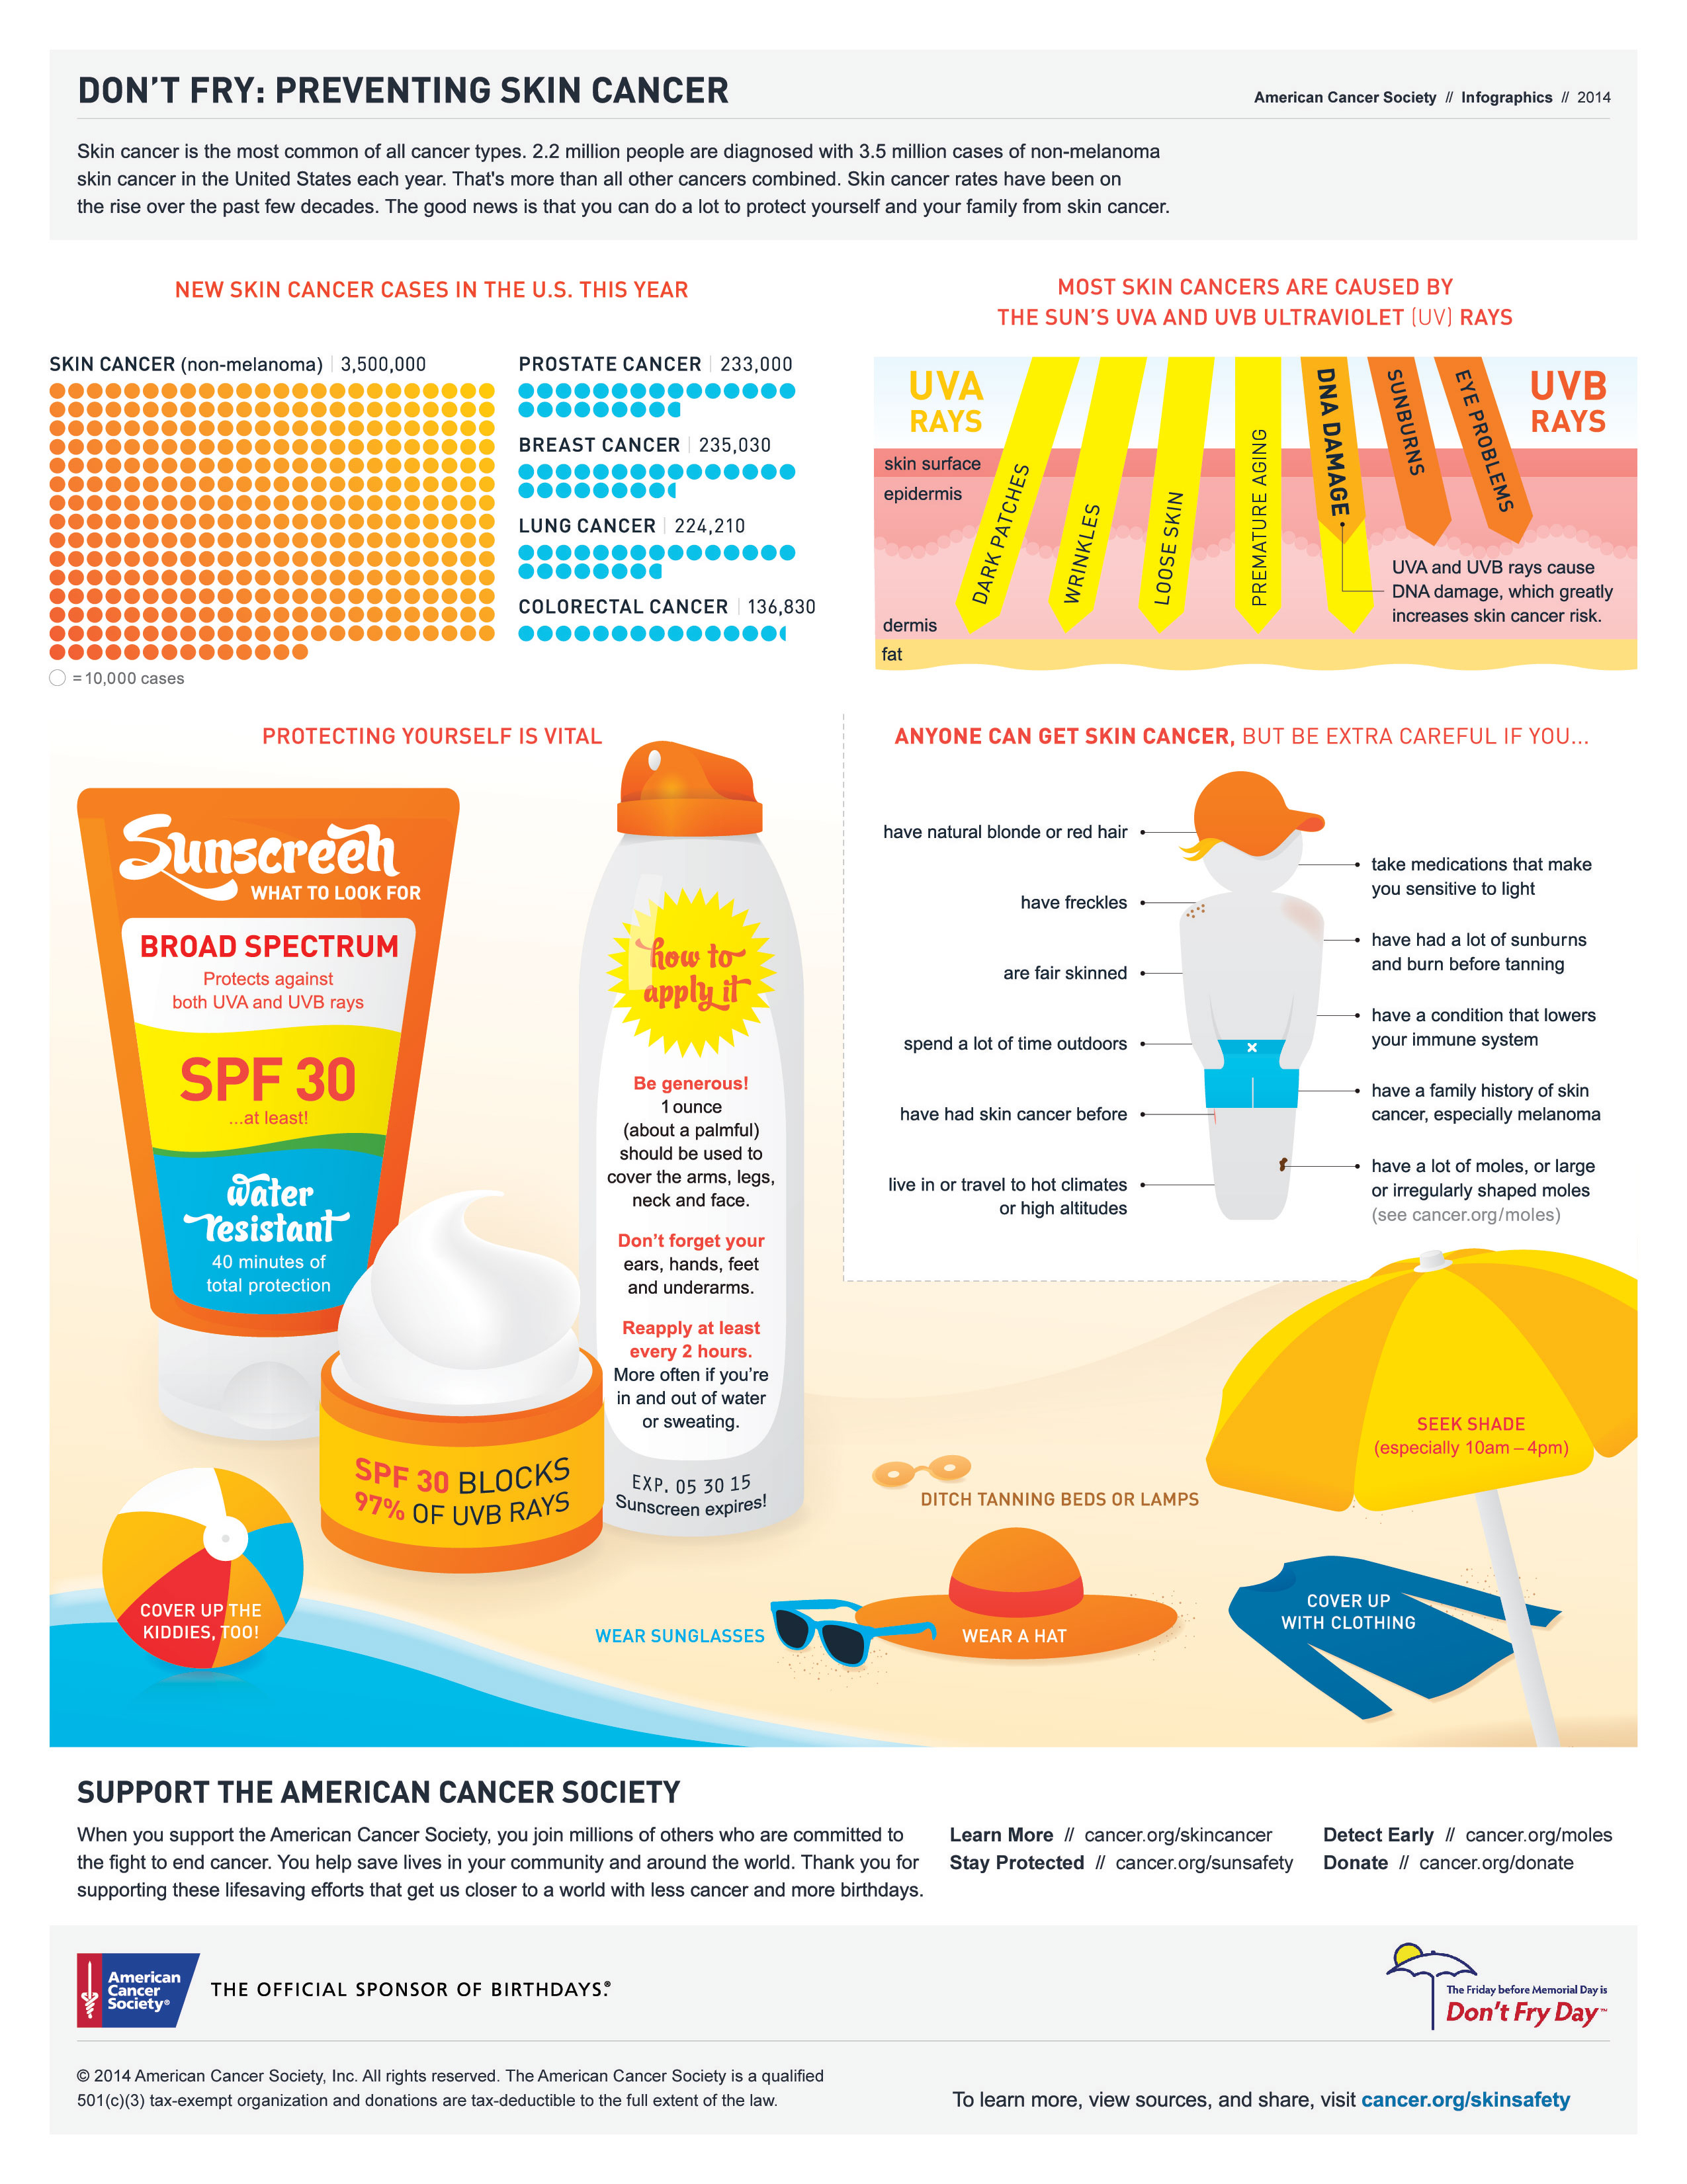 Air Travel Sunscreen: Ultimate Protection for Your Skin